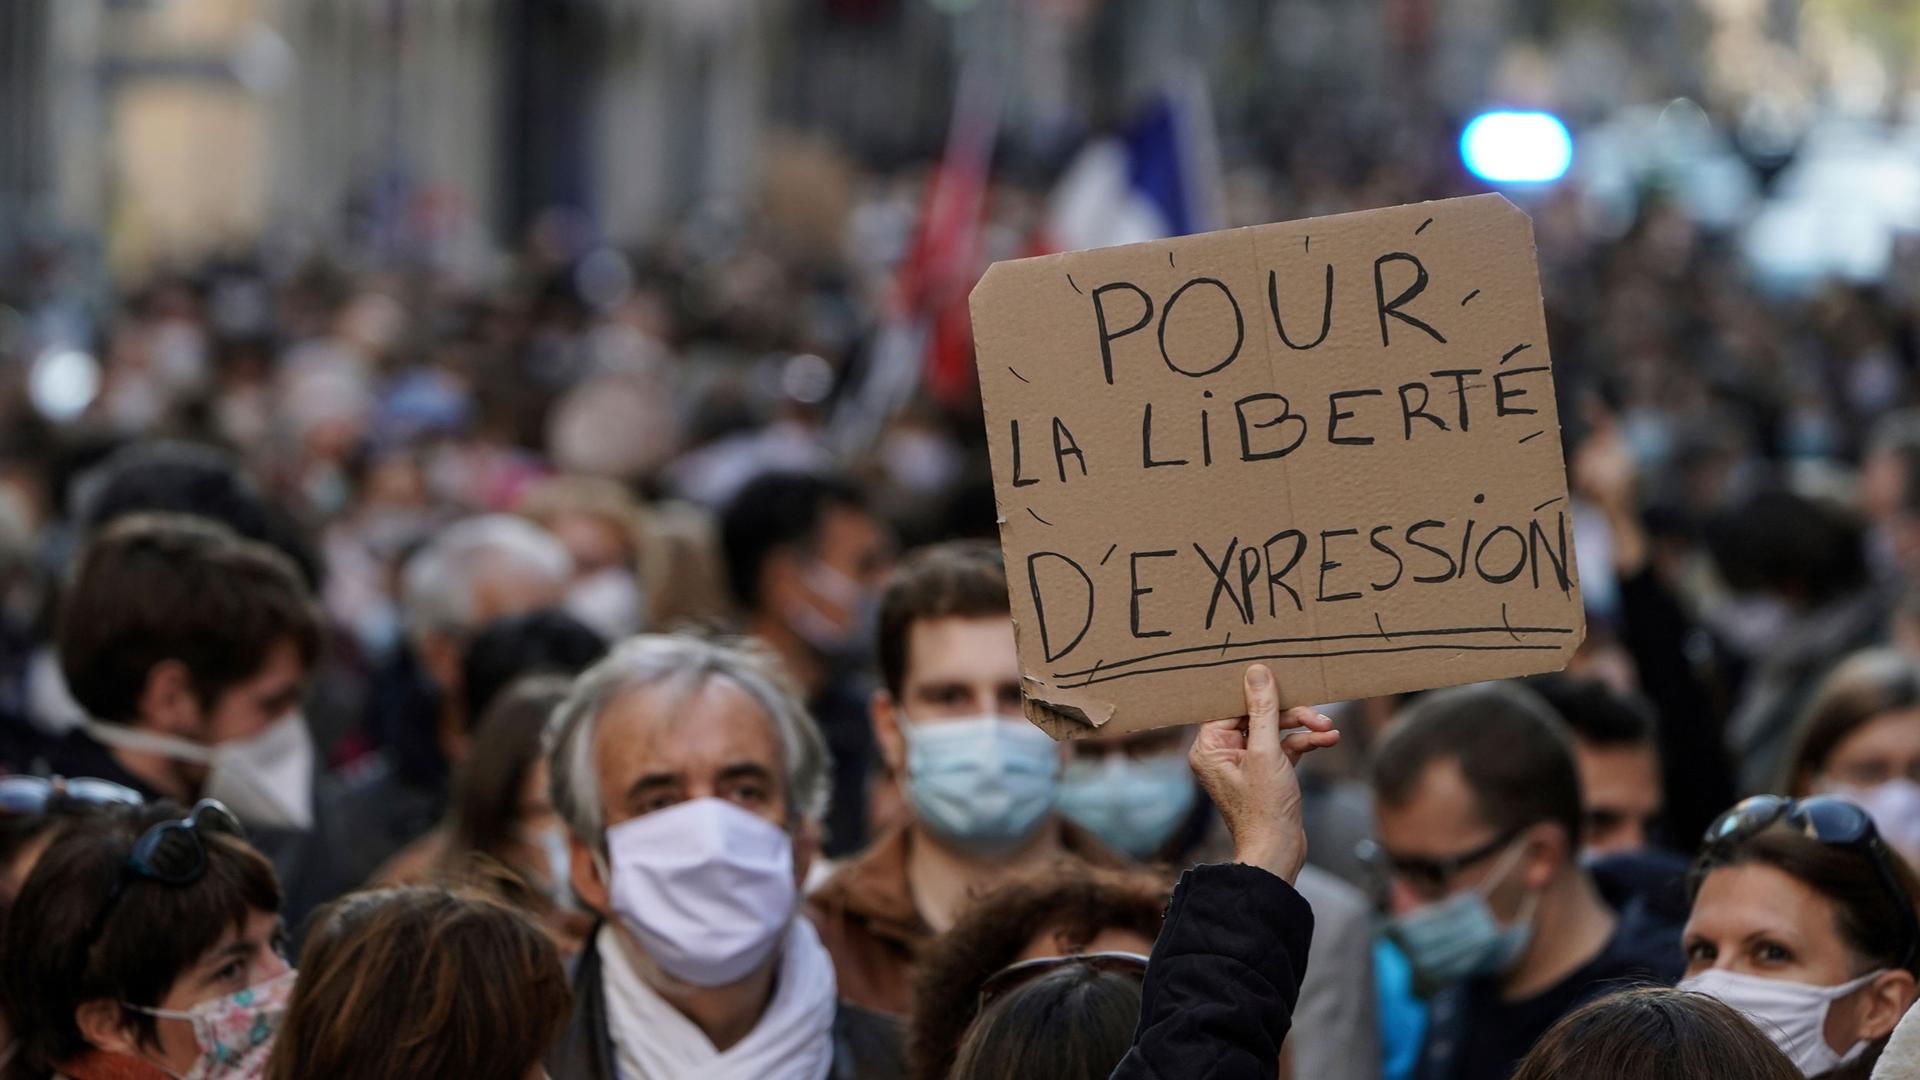 A large crowd of demonstrators are with one person holding a sign that read, "Pour La Liberte D'Espression," or "For the freedom of speech" in English.